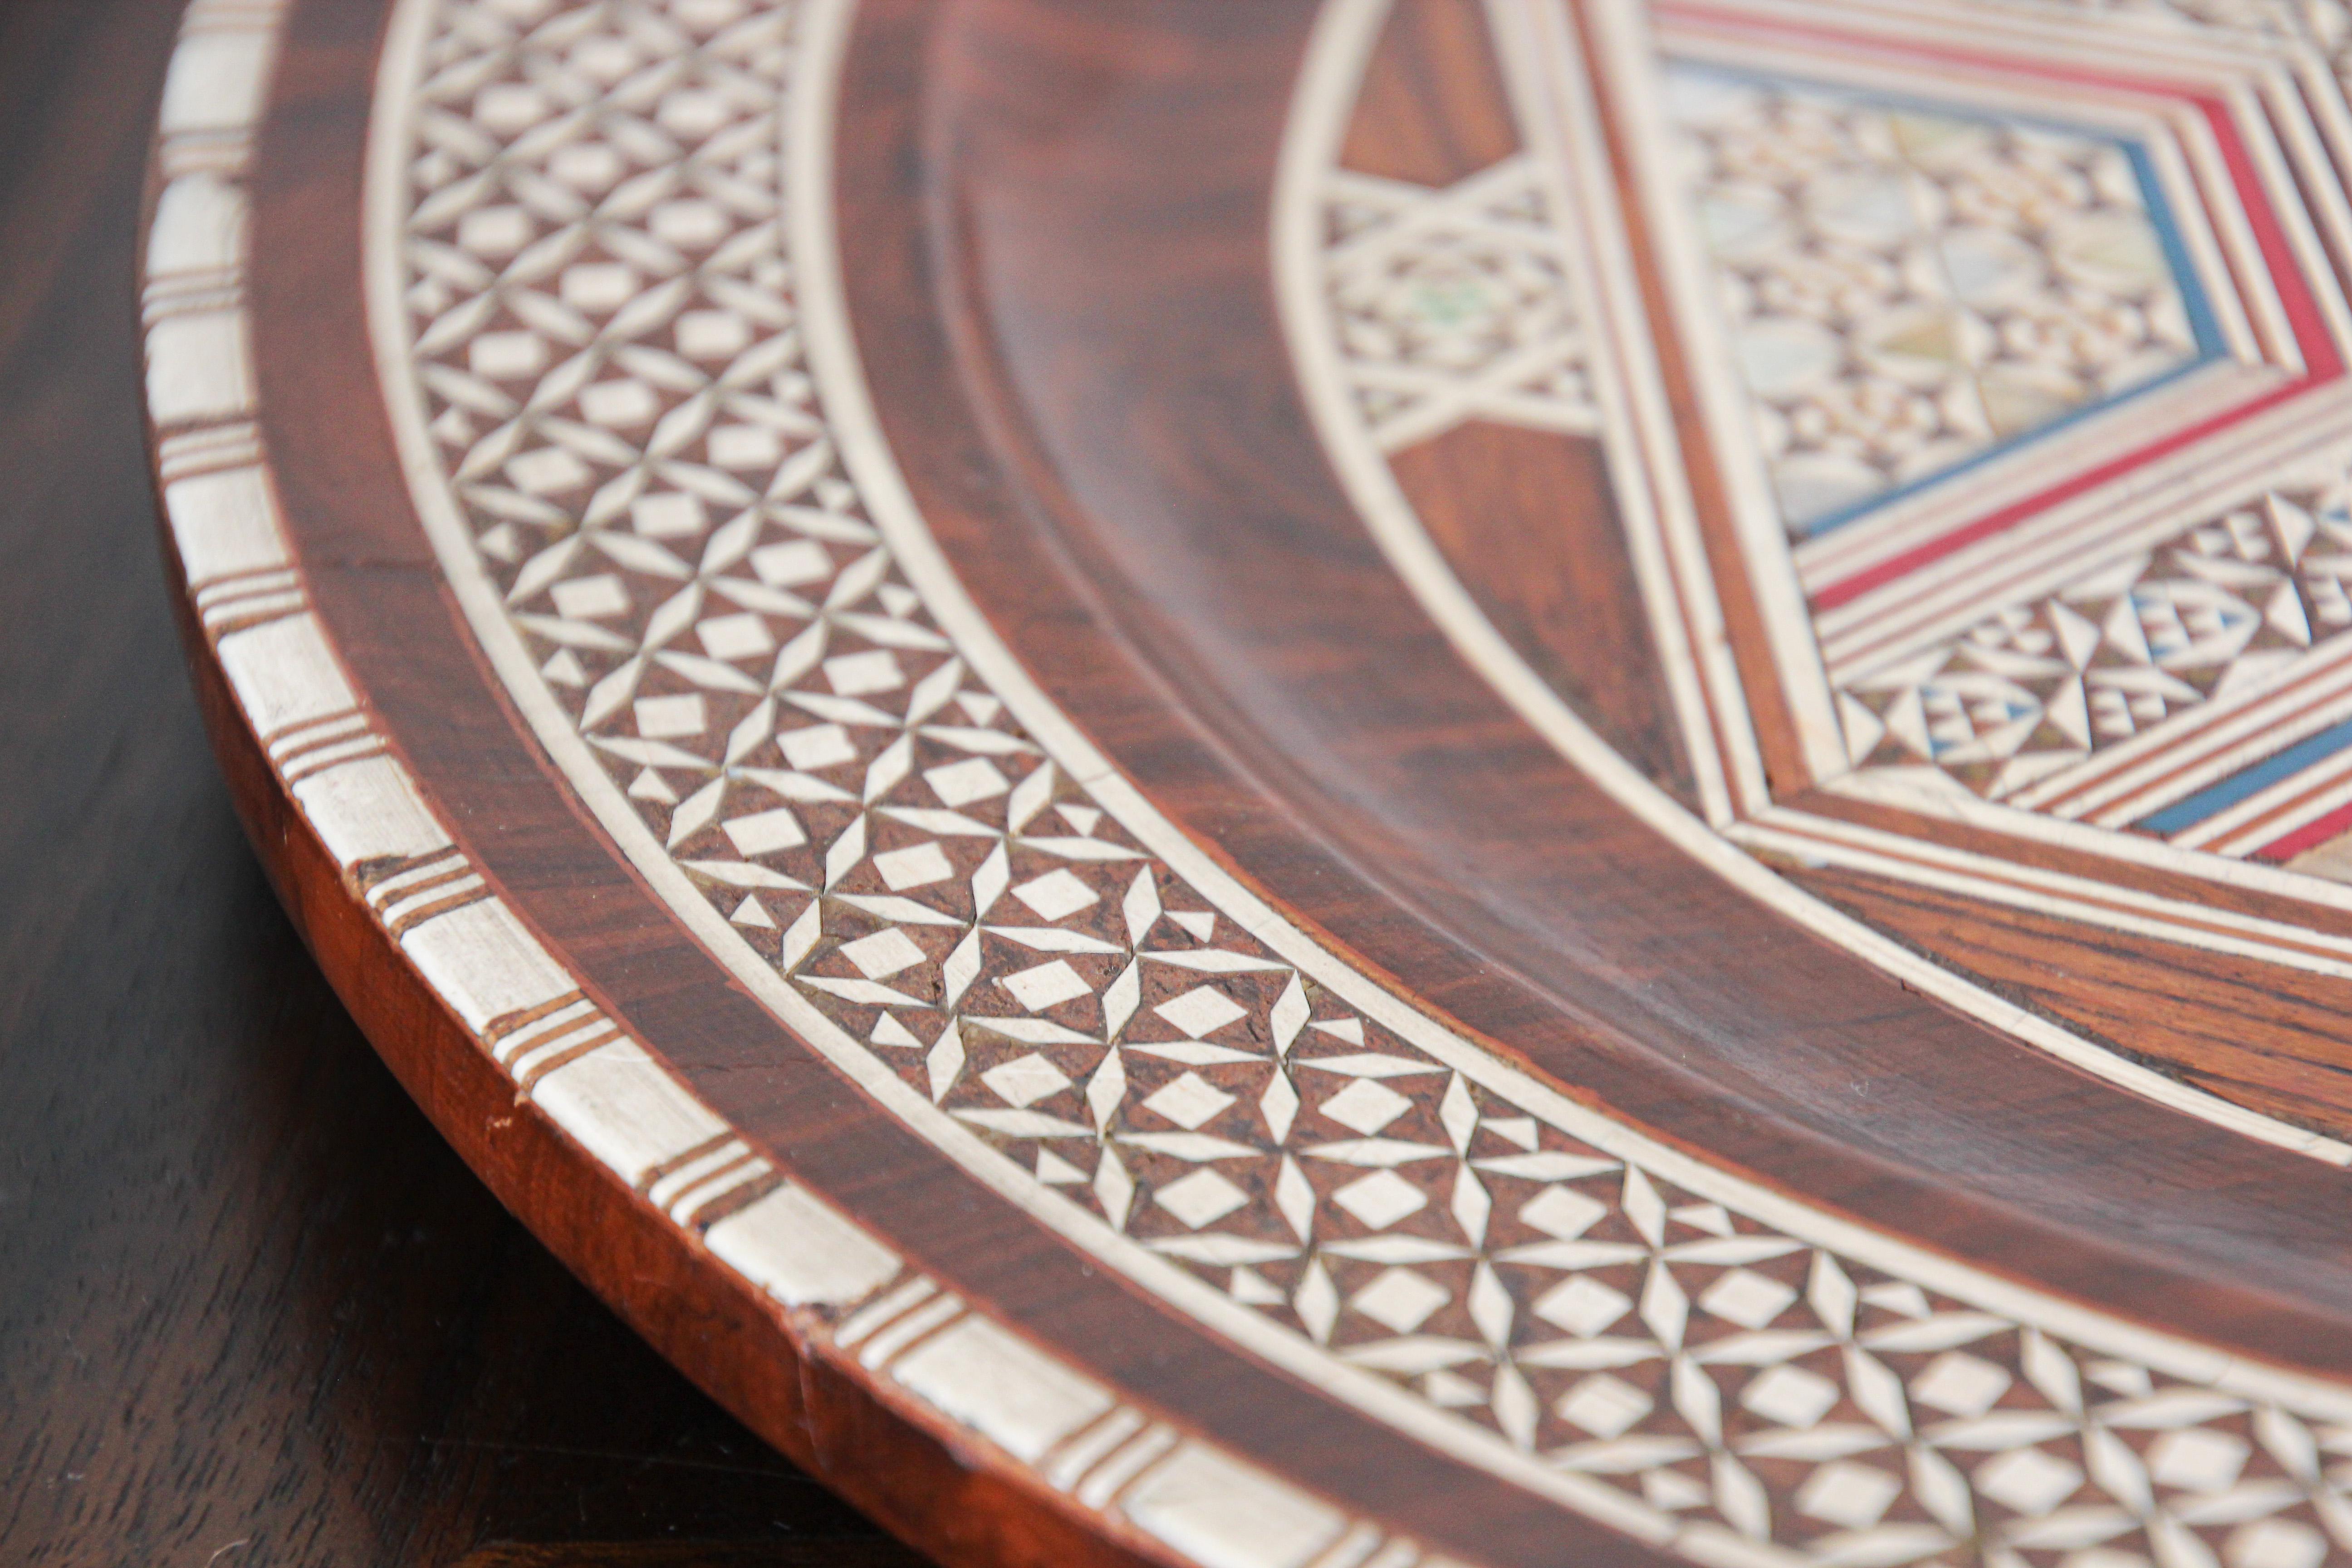 20th Century Middle Eastern Egyptian Inlaid Marquetry Decorative Platter For Sale